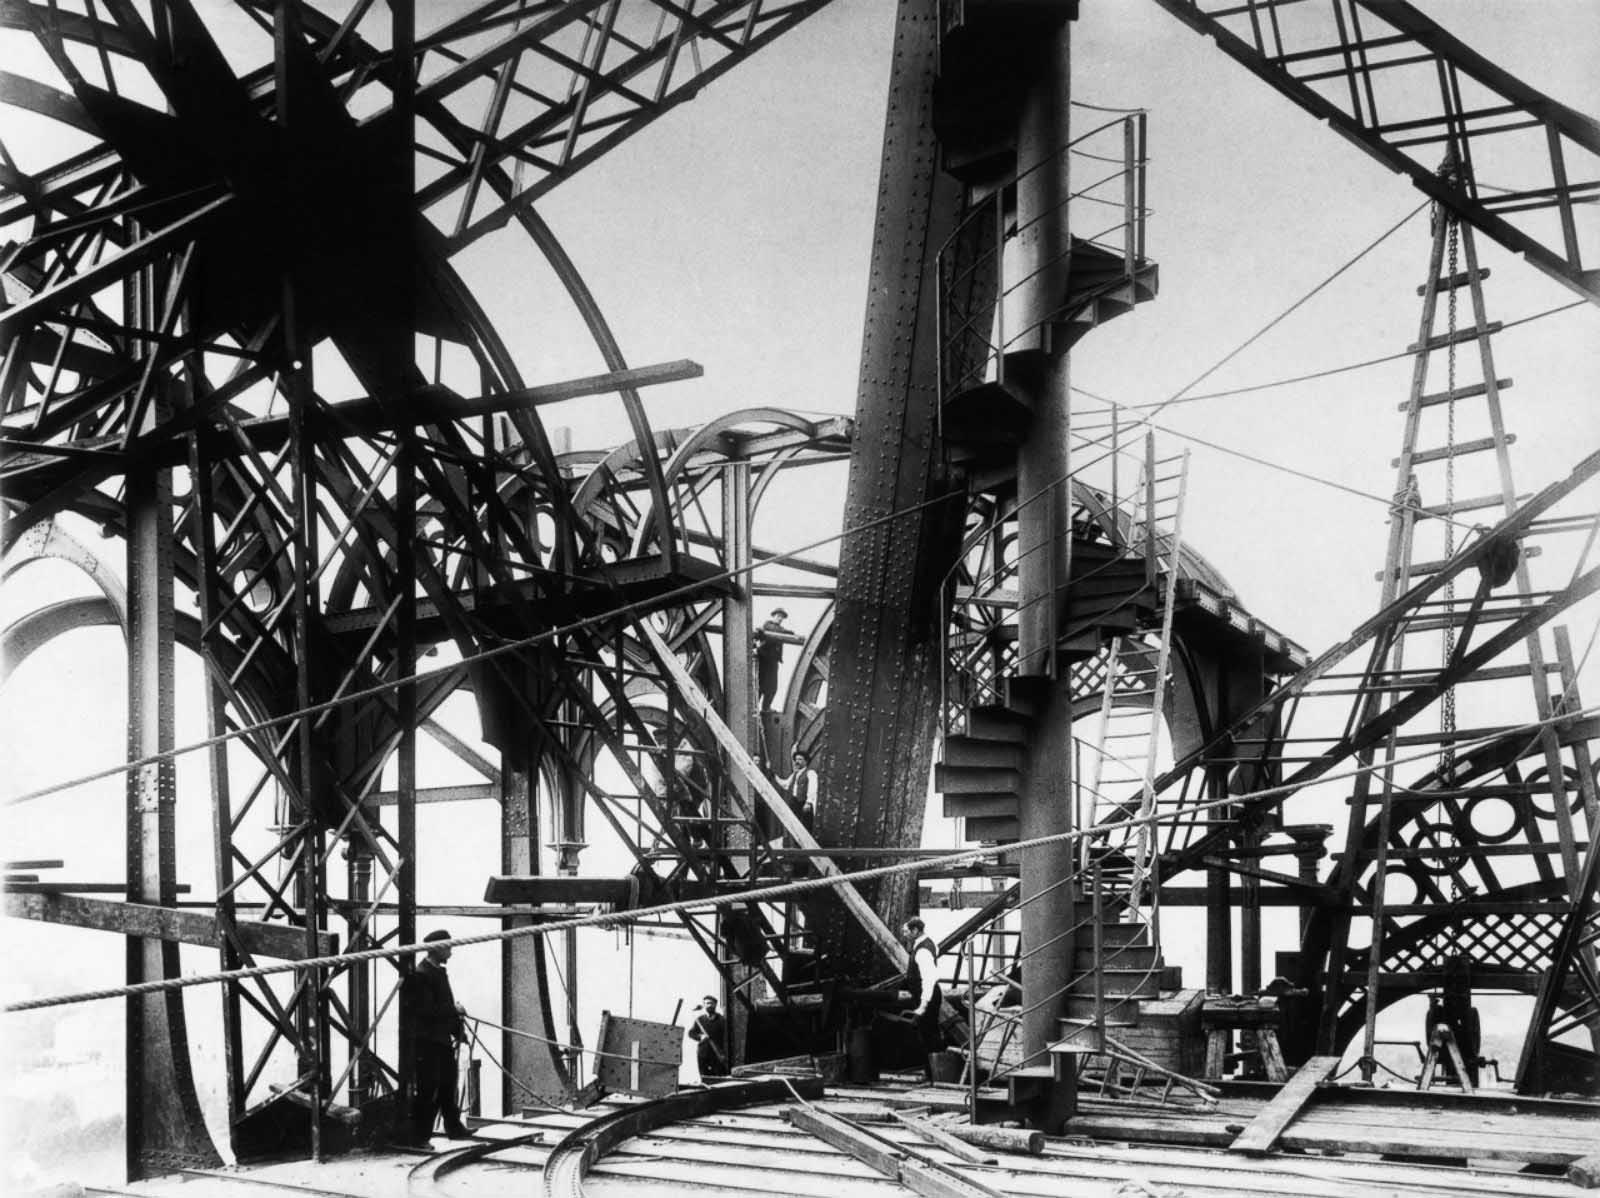 Because of Eiffel's safety precautions, including the use of movable stagings, guard-rails and screens, only one person died during construction.